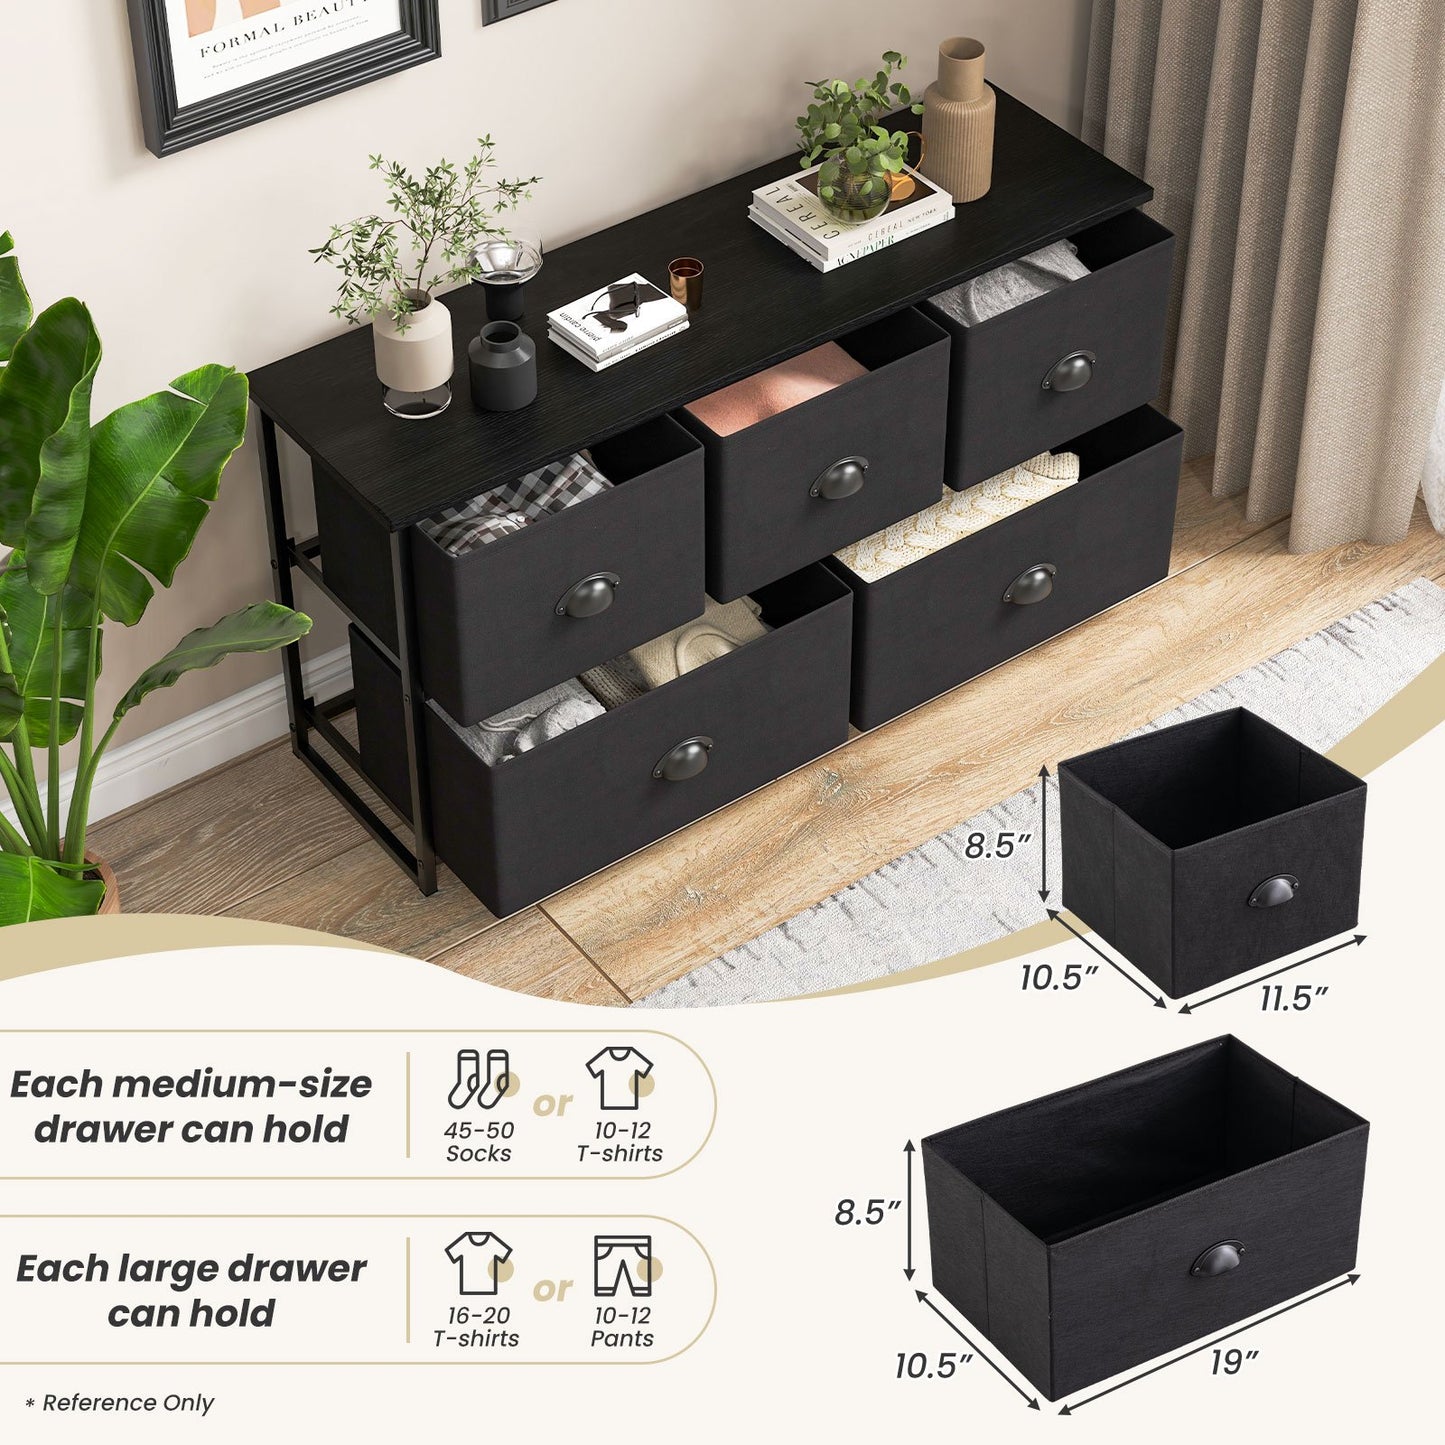 Dresser Storage Tower with 5 Foldable Cloth Storage Cubes, Black